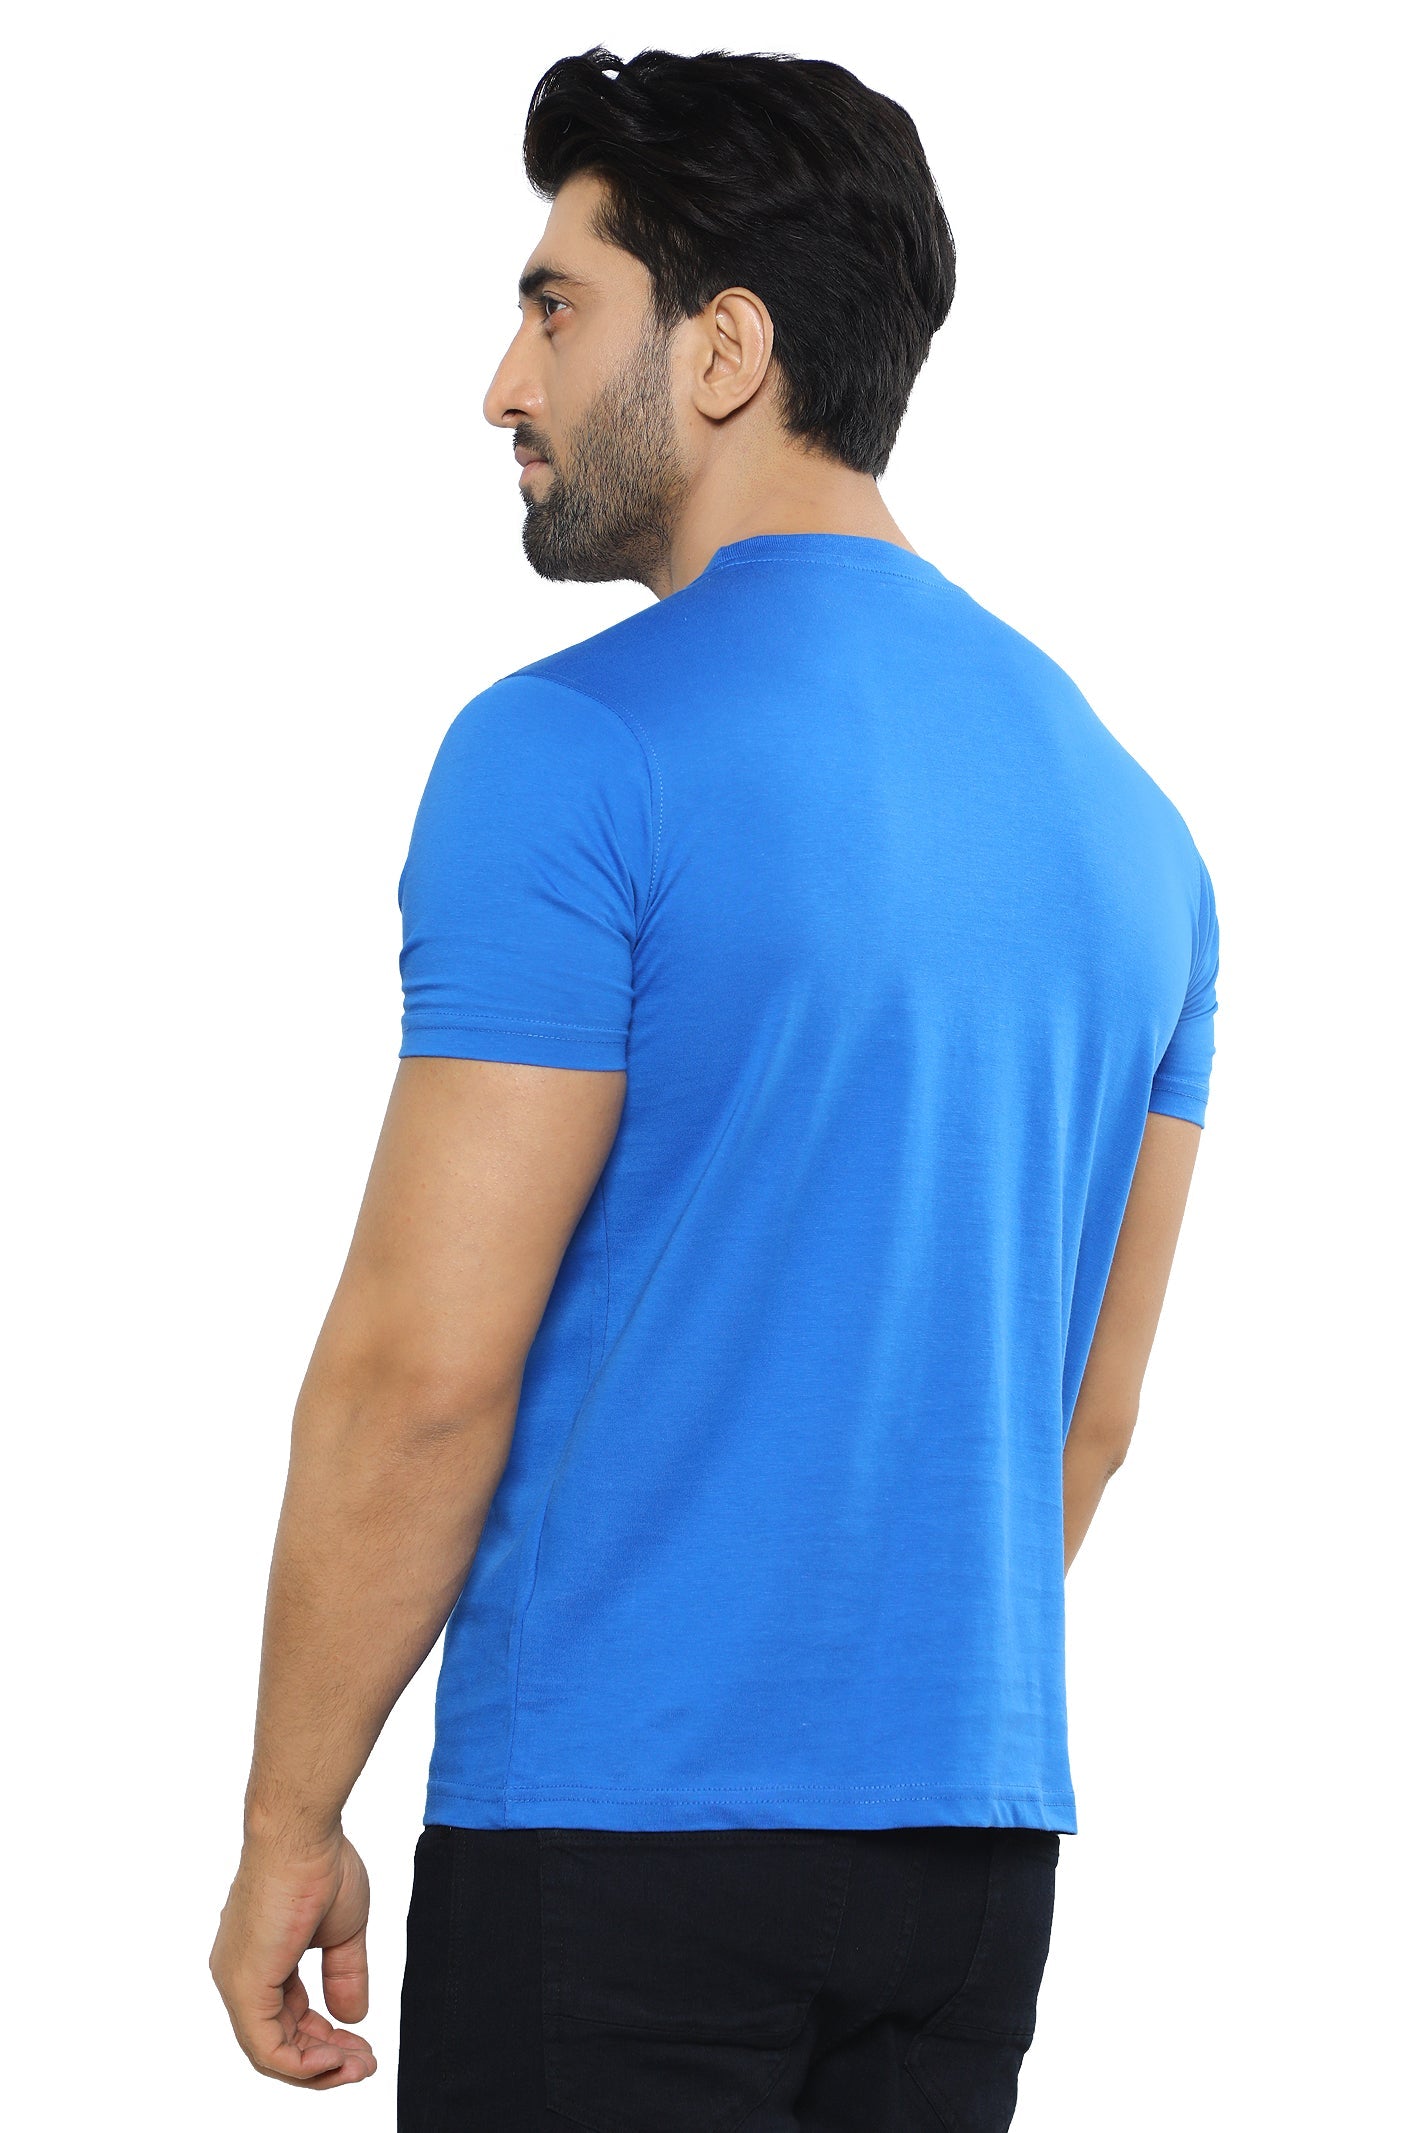 Diners Men's Round Neck T-Shirt SKU: NA856-R-BLUE - Diners